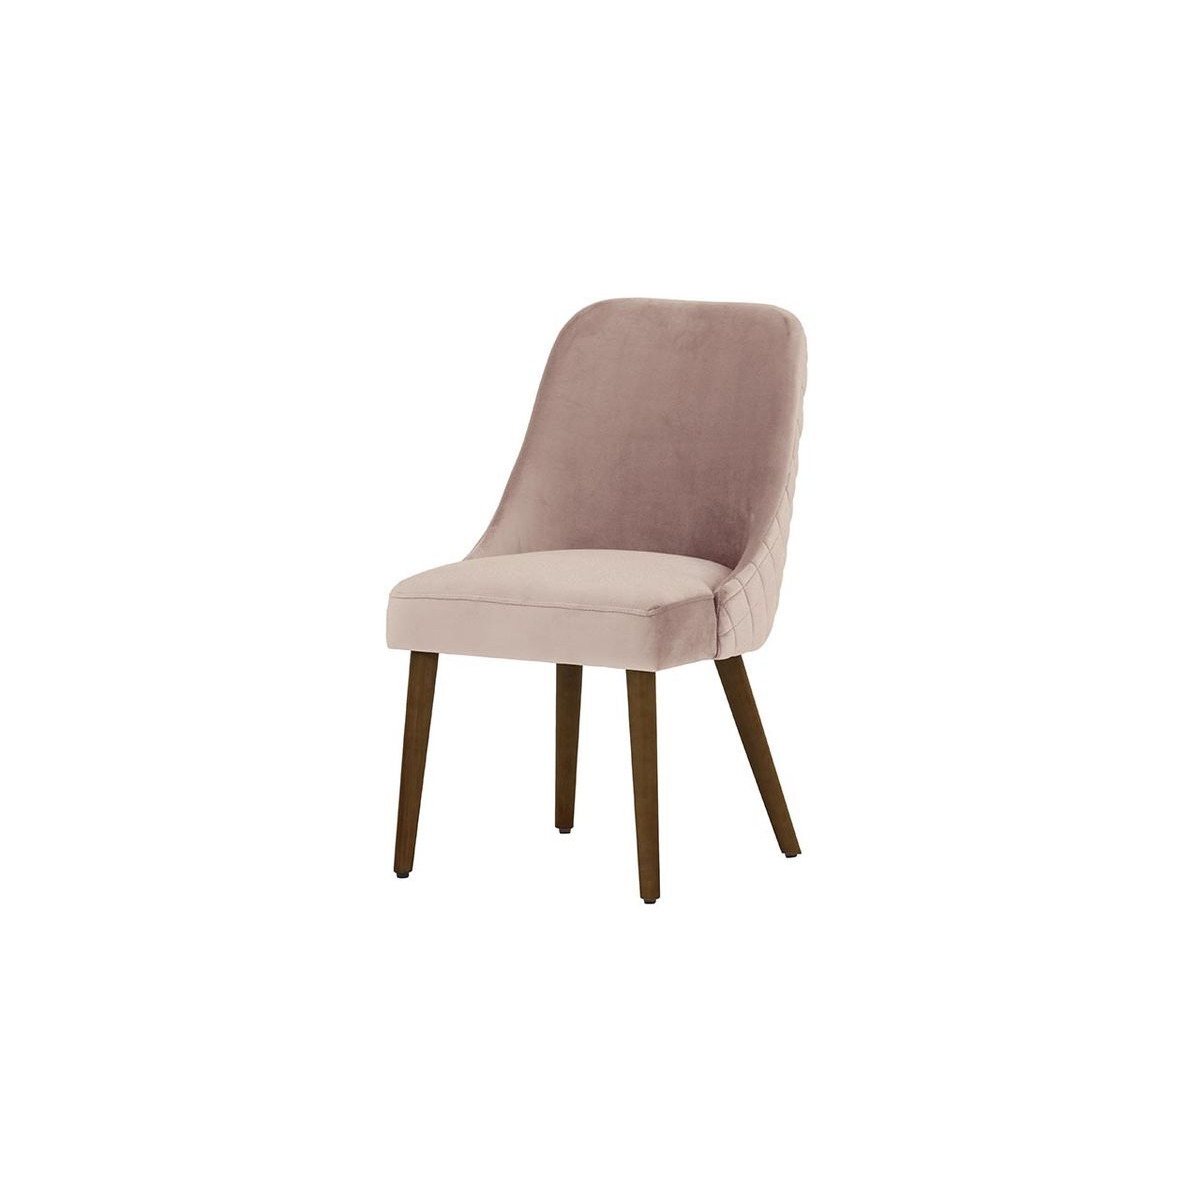 Albion Dining Chair with Stitching, lilac, Leg colour: dark oak - image 1